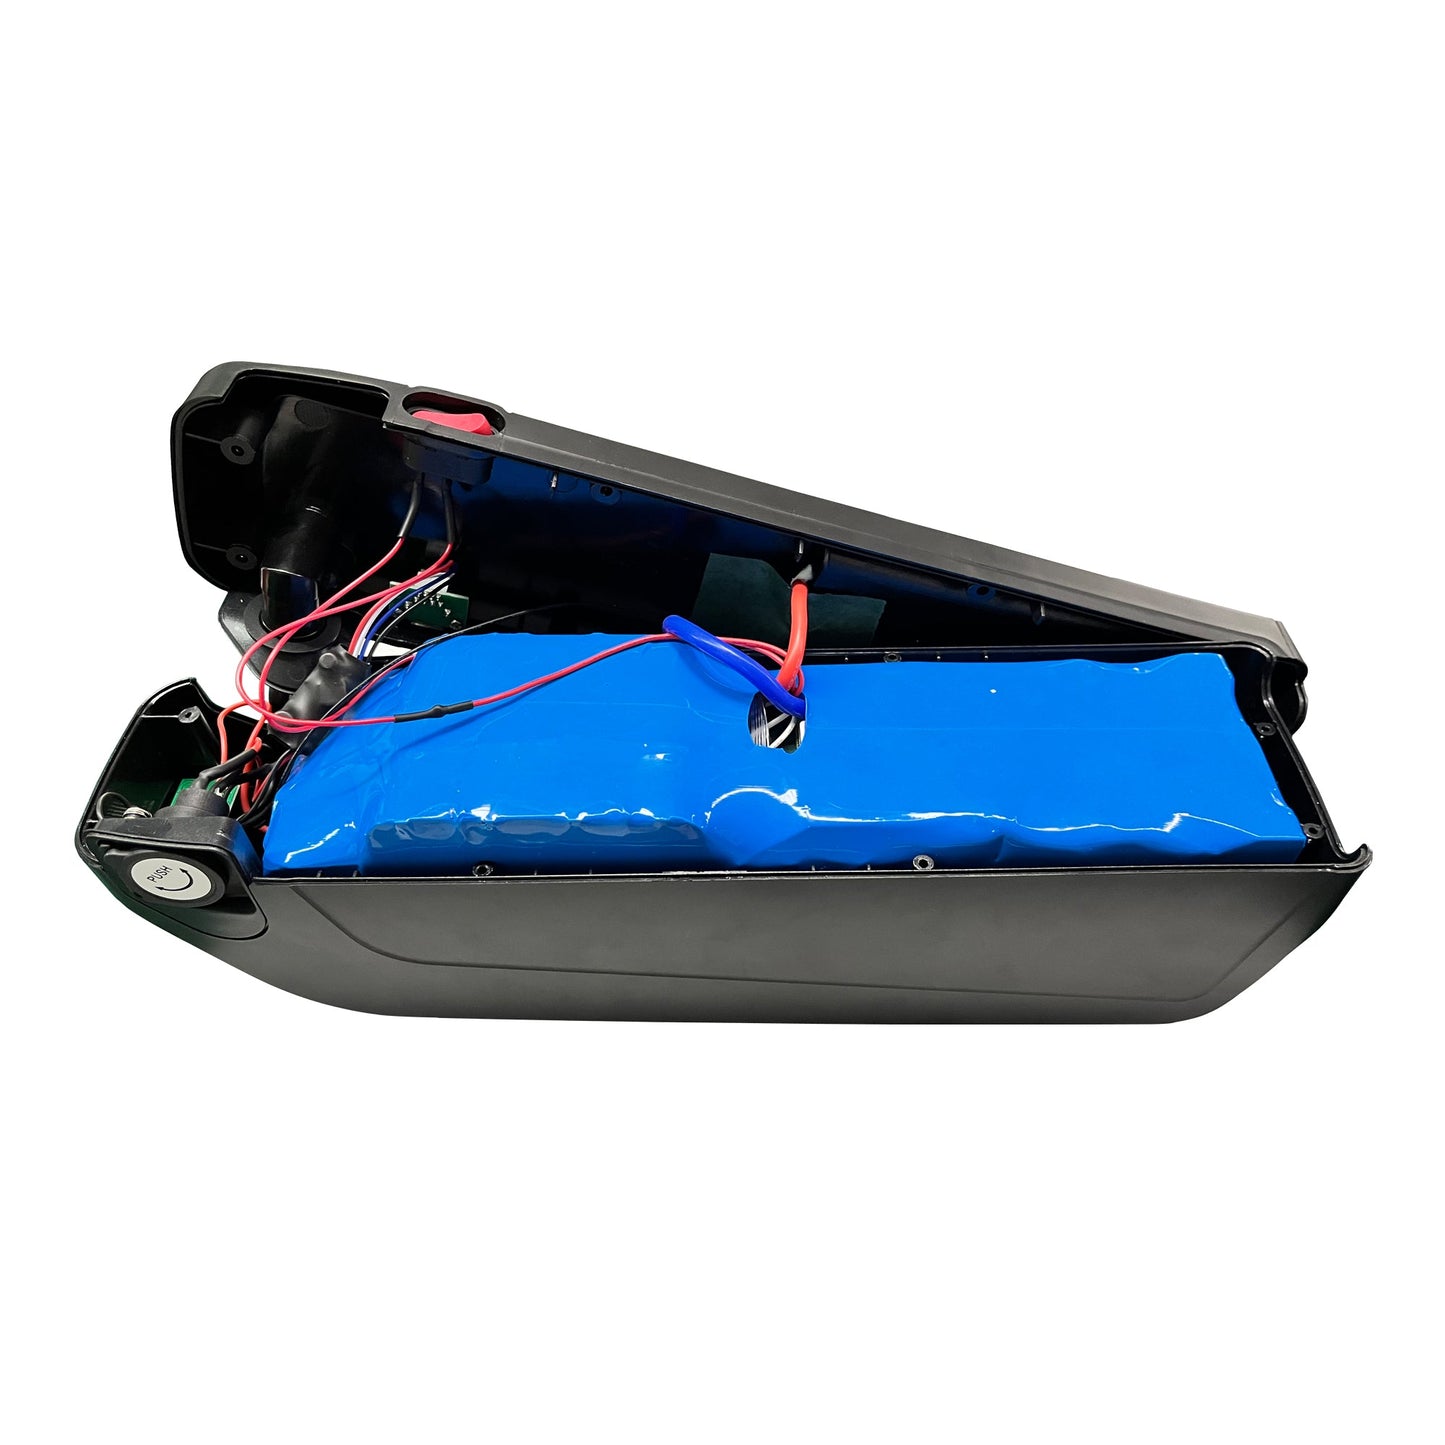 Spain Stock 48V20AH Hailong ebike battery 21700 A grade cell 40A BMS support 1800W motor included 3A charger